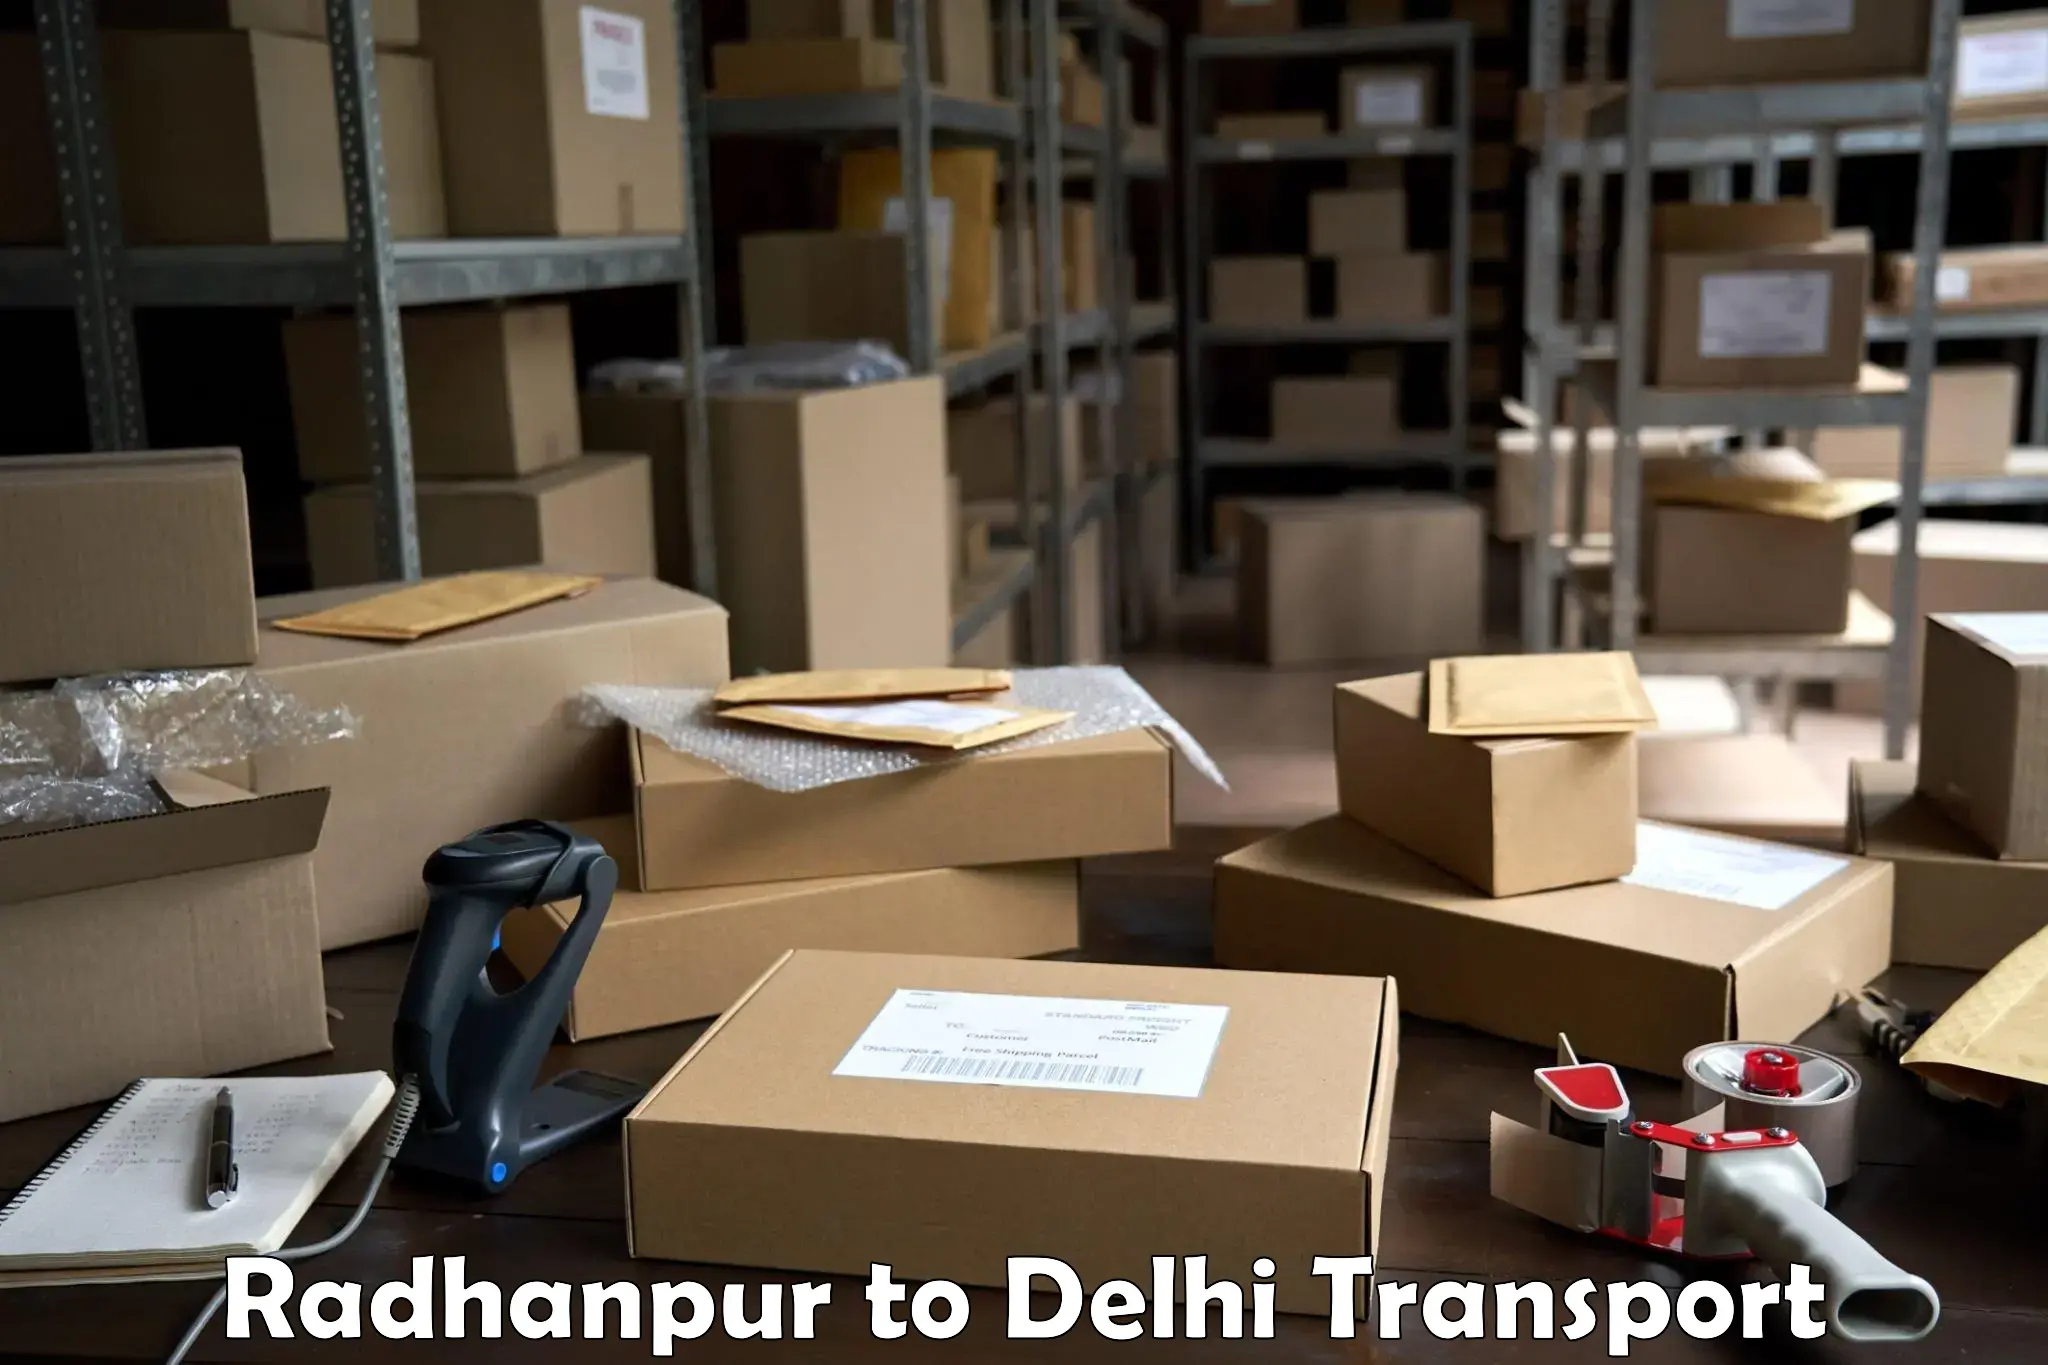 Road transport online services Radhanpur to NCR